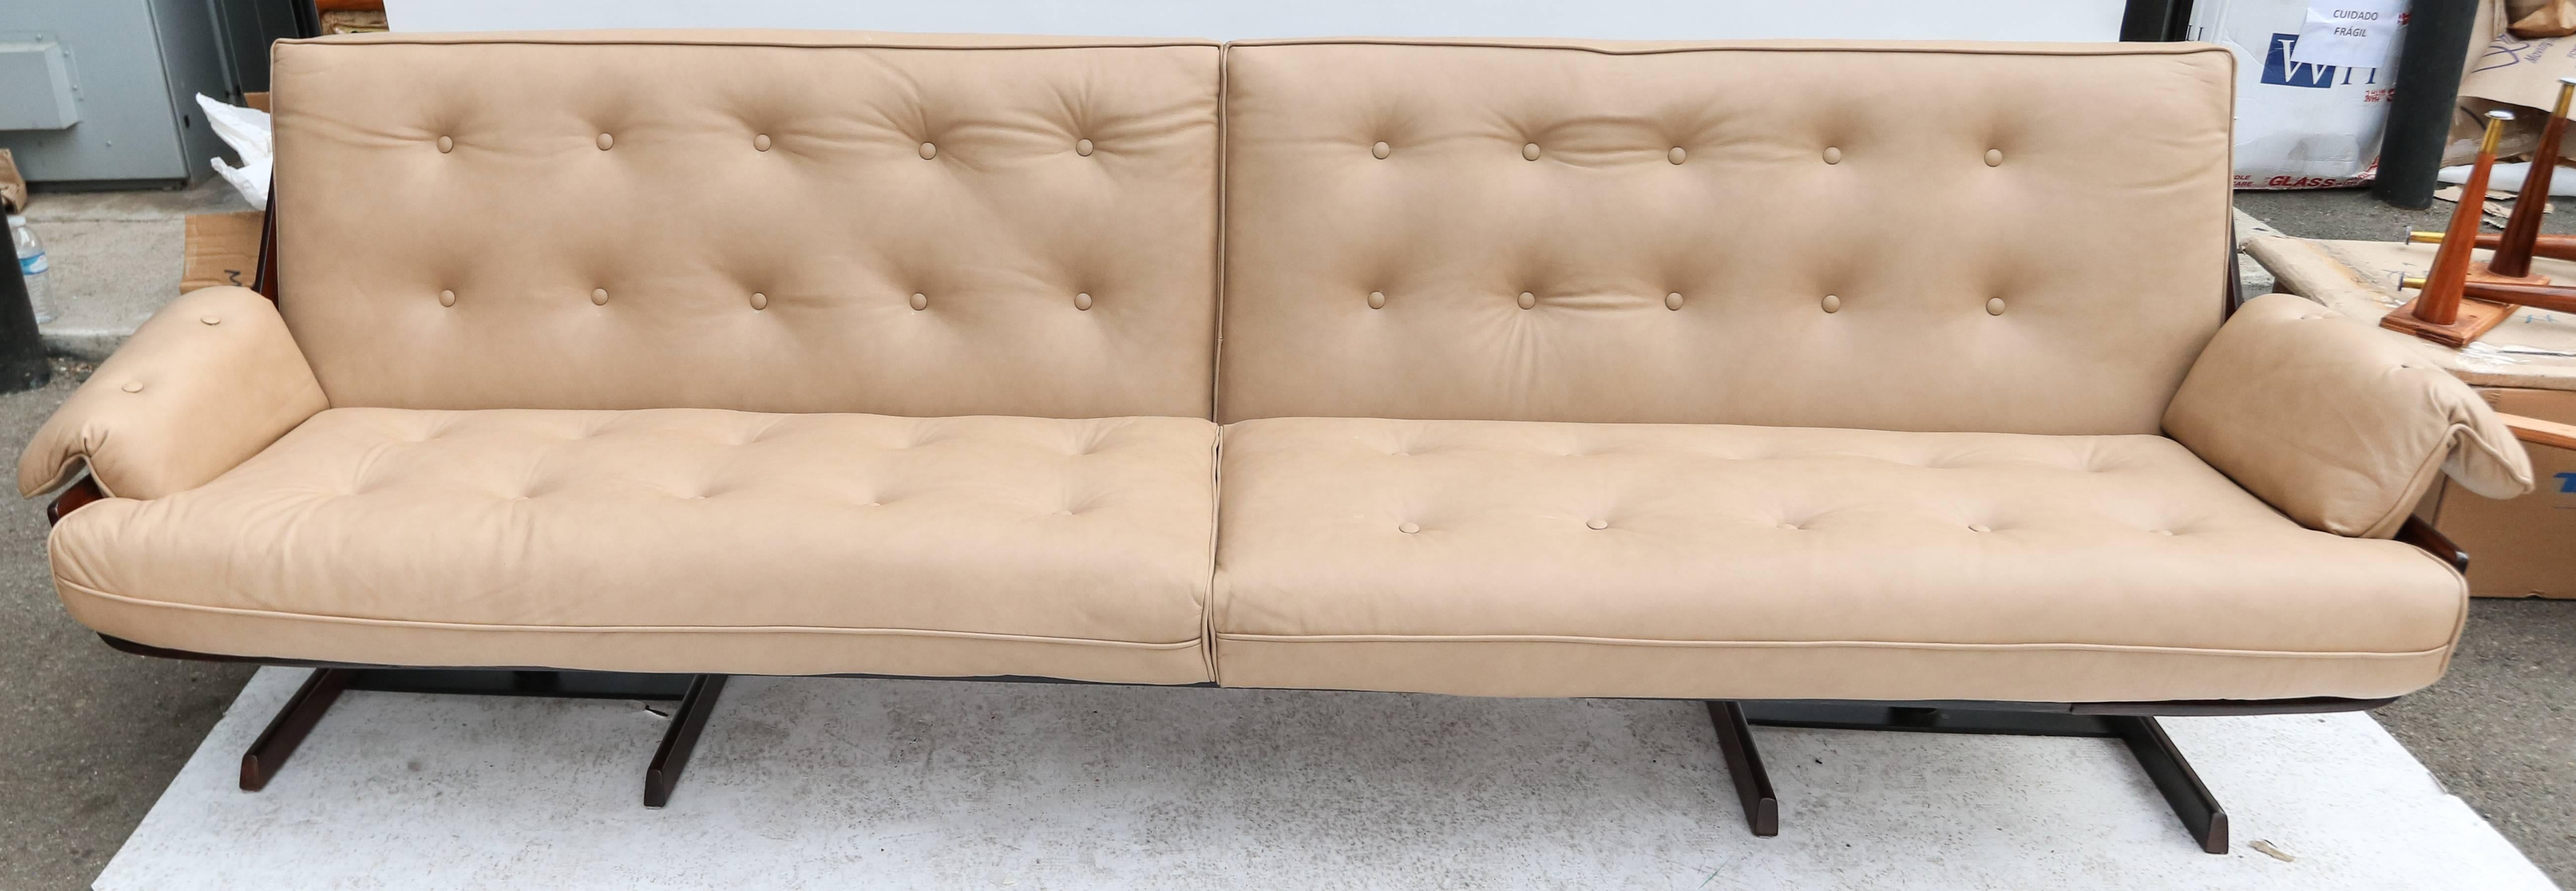 1960s sofa attributed to Novo Rumo in Brazilian jacaranda wood and upholstered in beige leather.